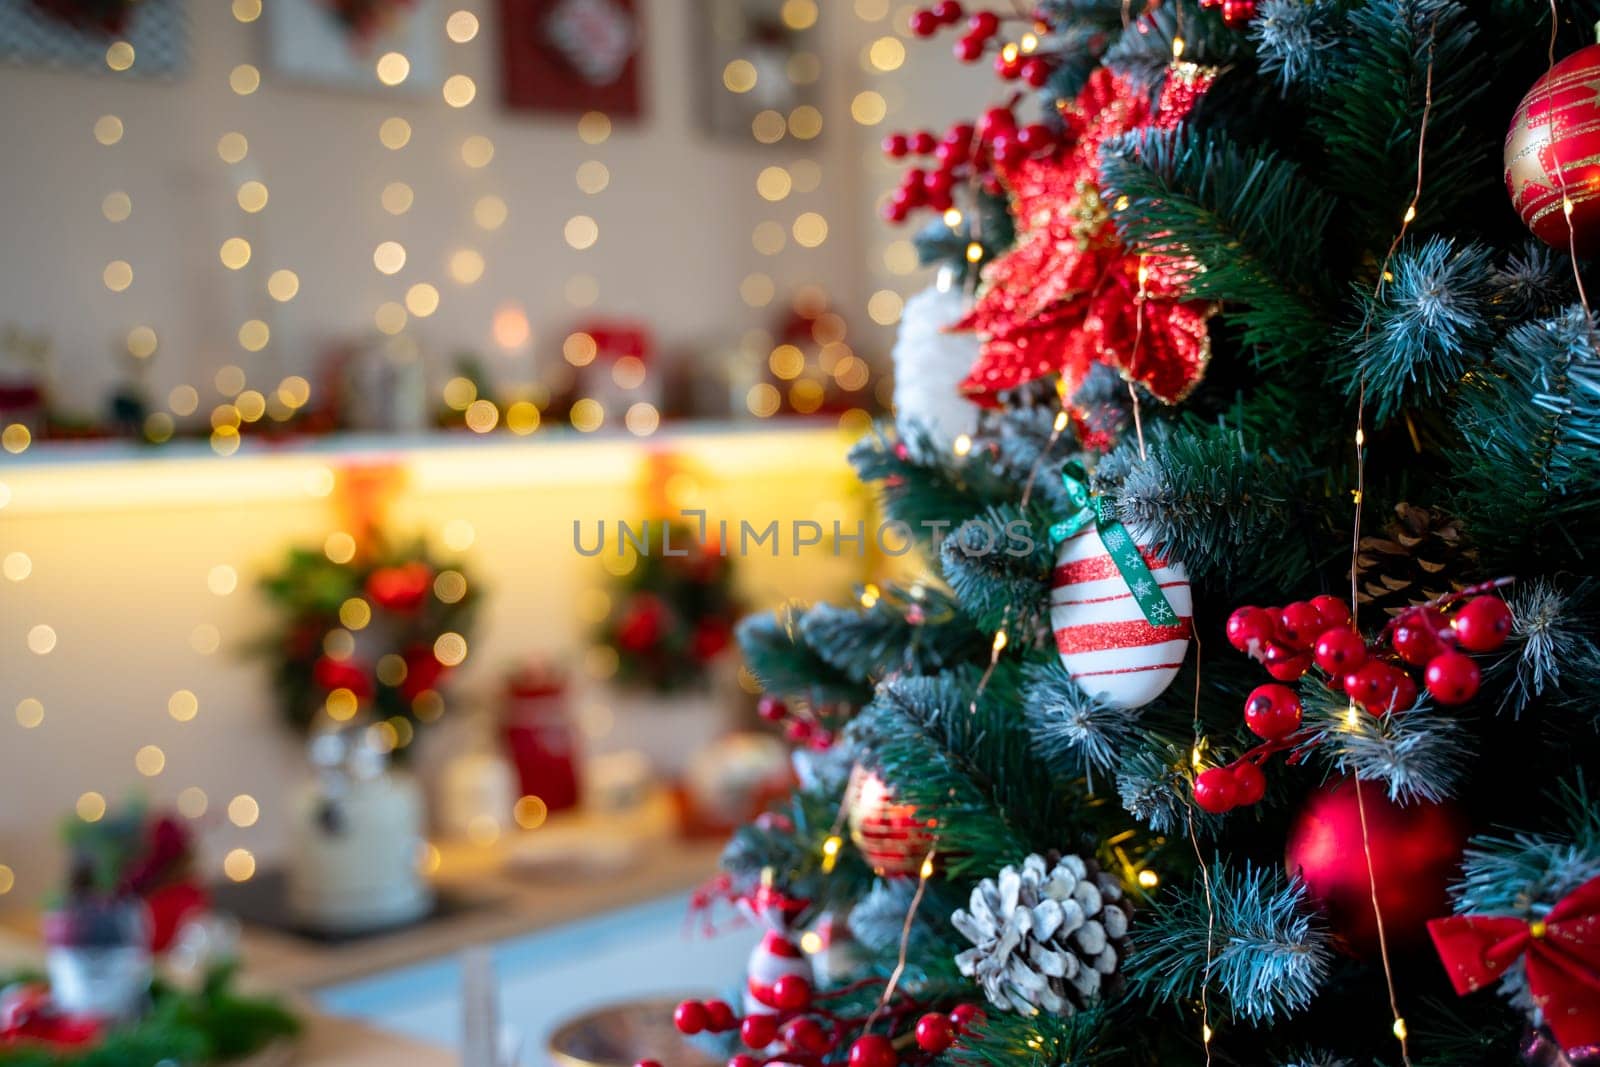 Christmas Tree with Decoration On A Winter Background With Bright Lights.